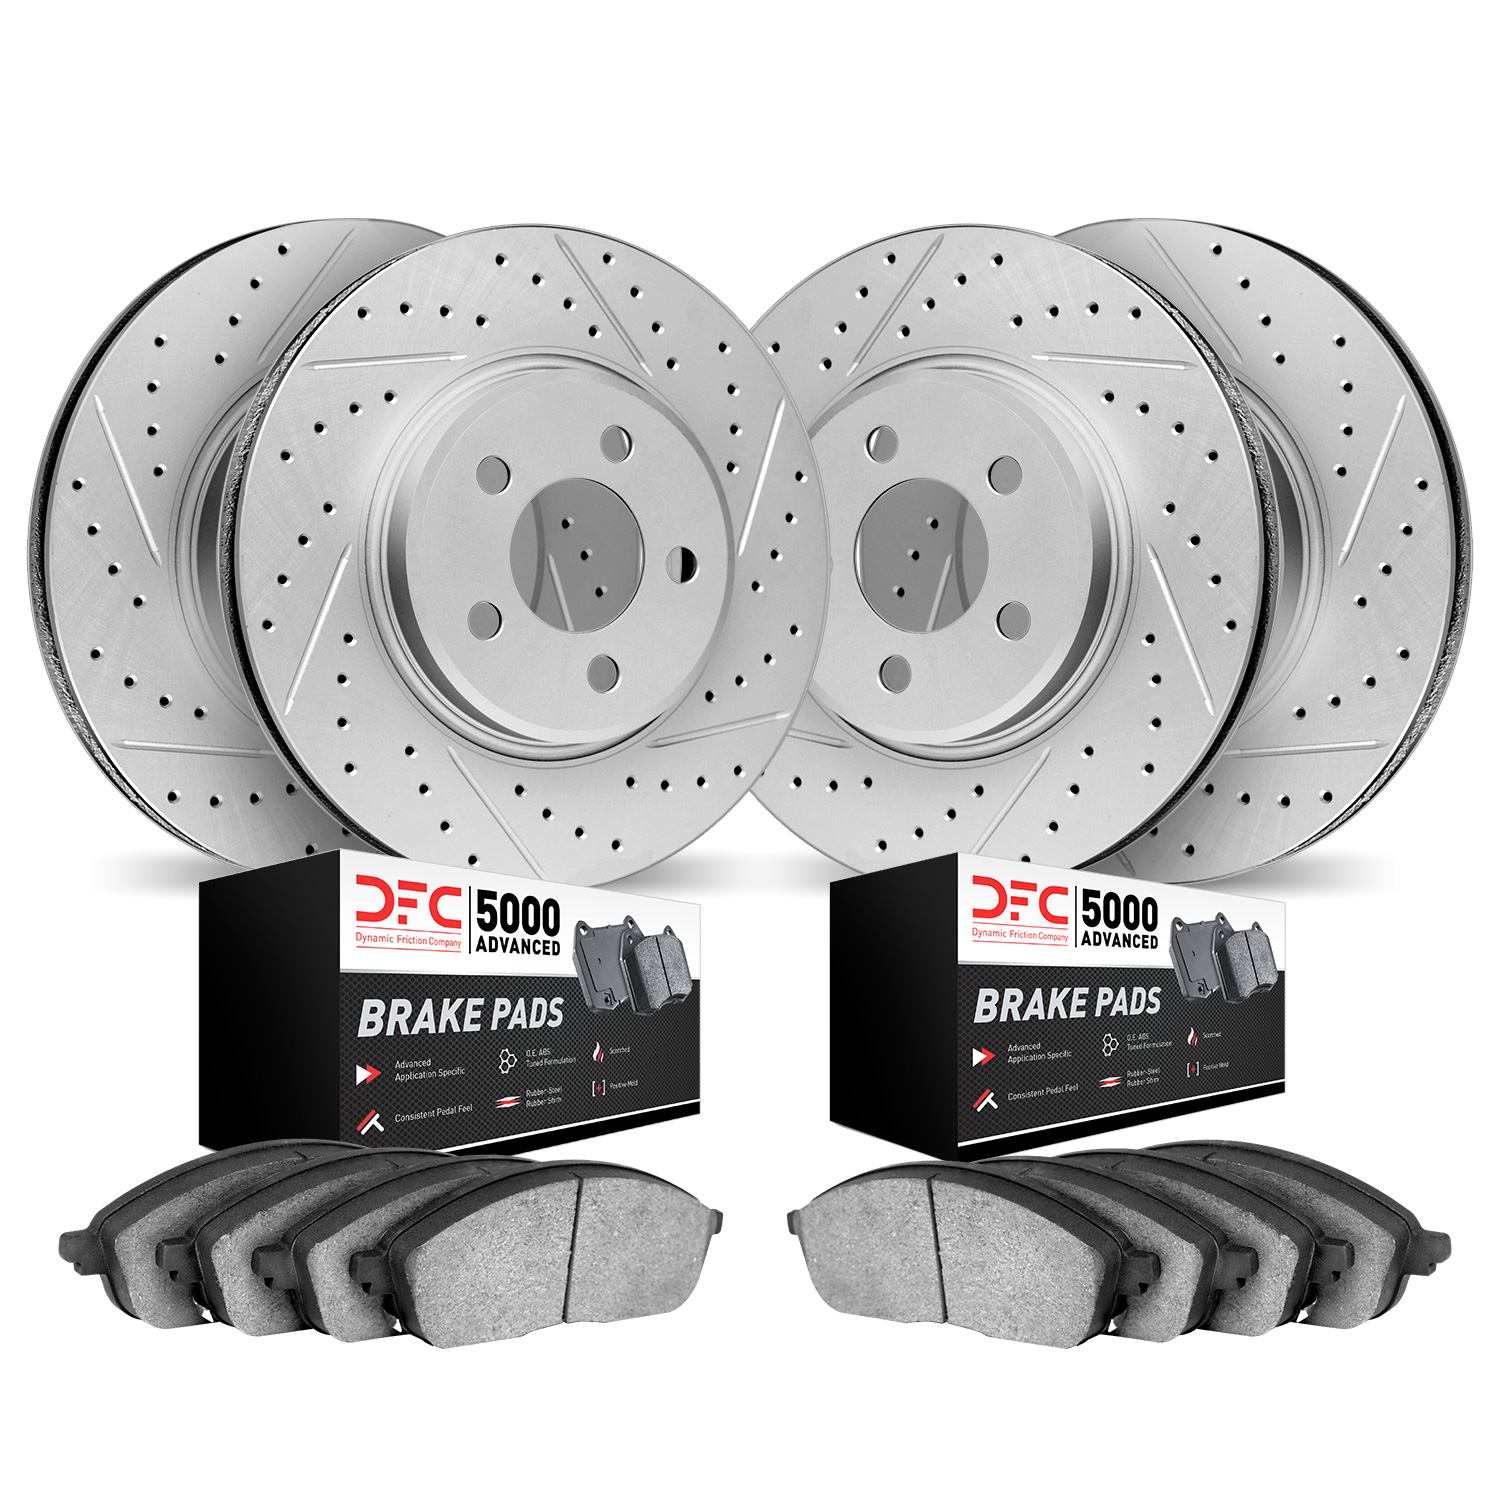 2504-31025 Geoperformance Drilled/Slotted Rotors w/5000 Advanced Brake Pads Kit, 2007-2008 BMW, Position: Front and Rear